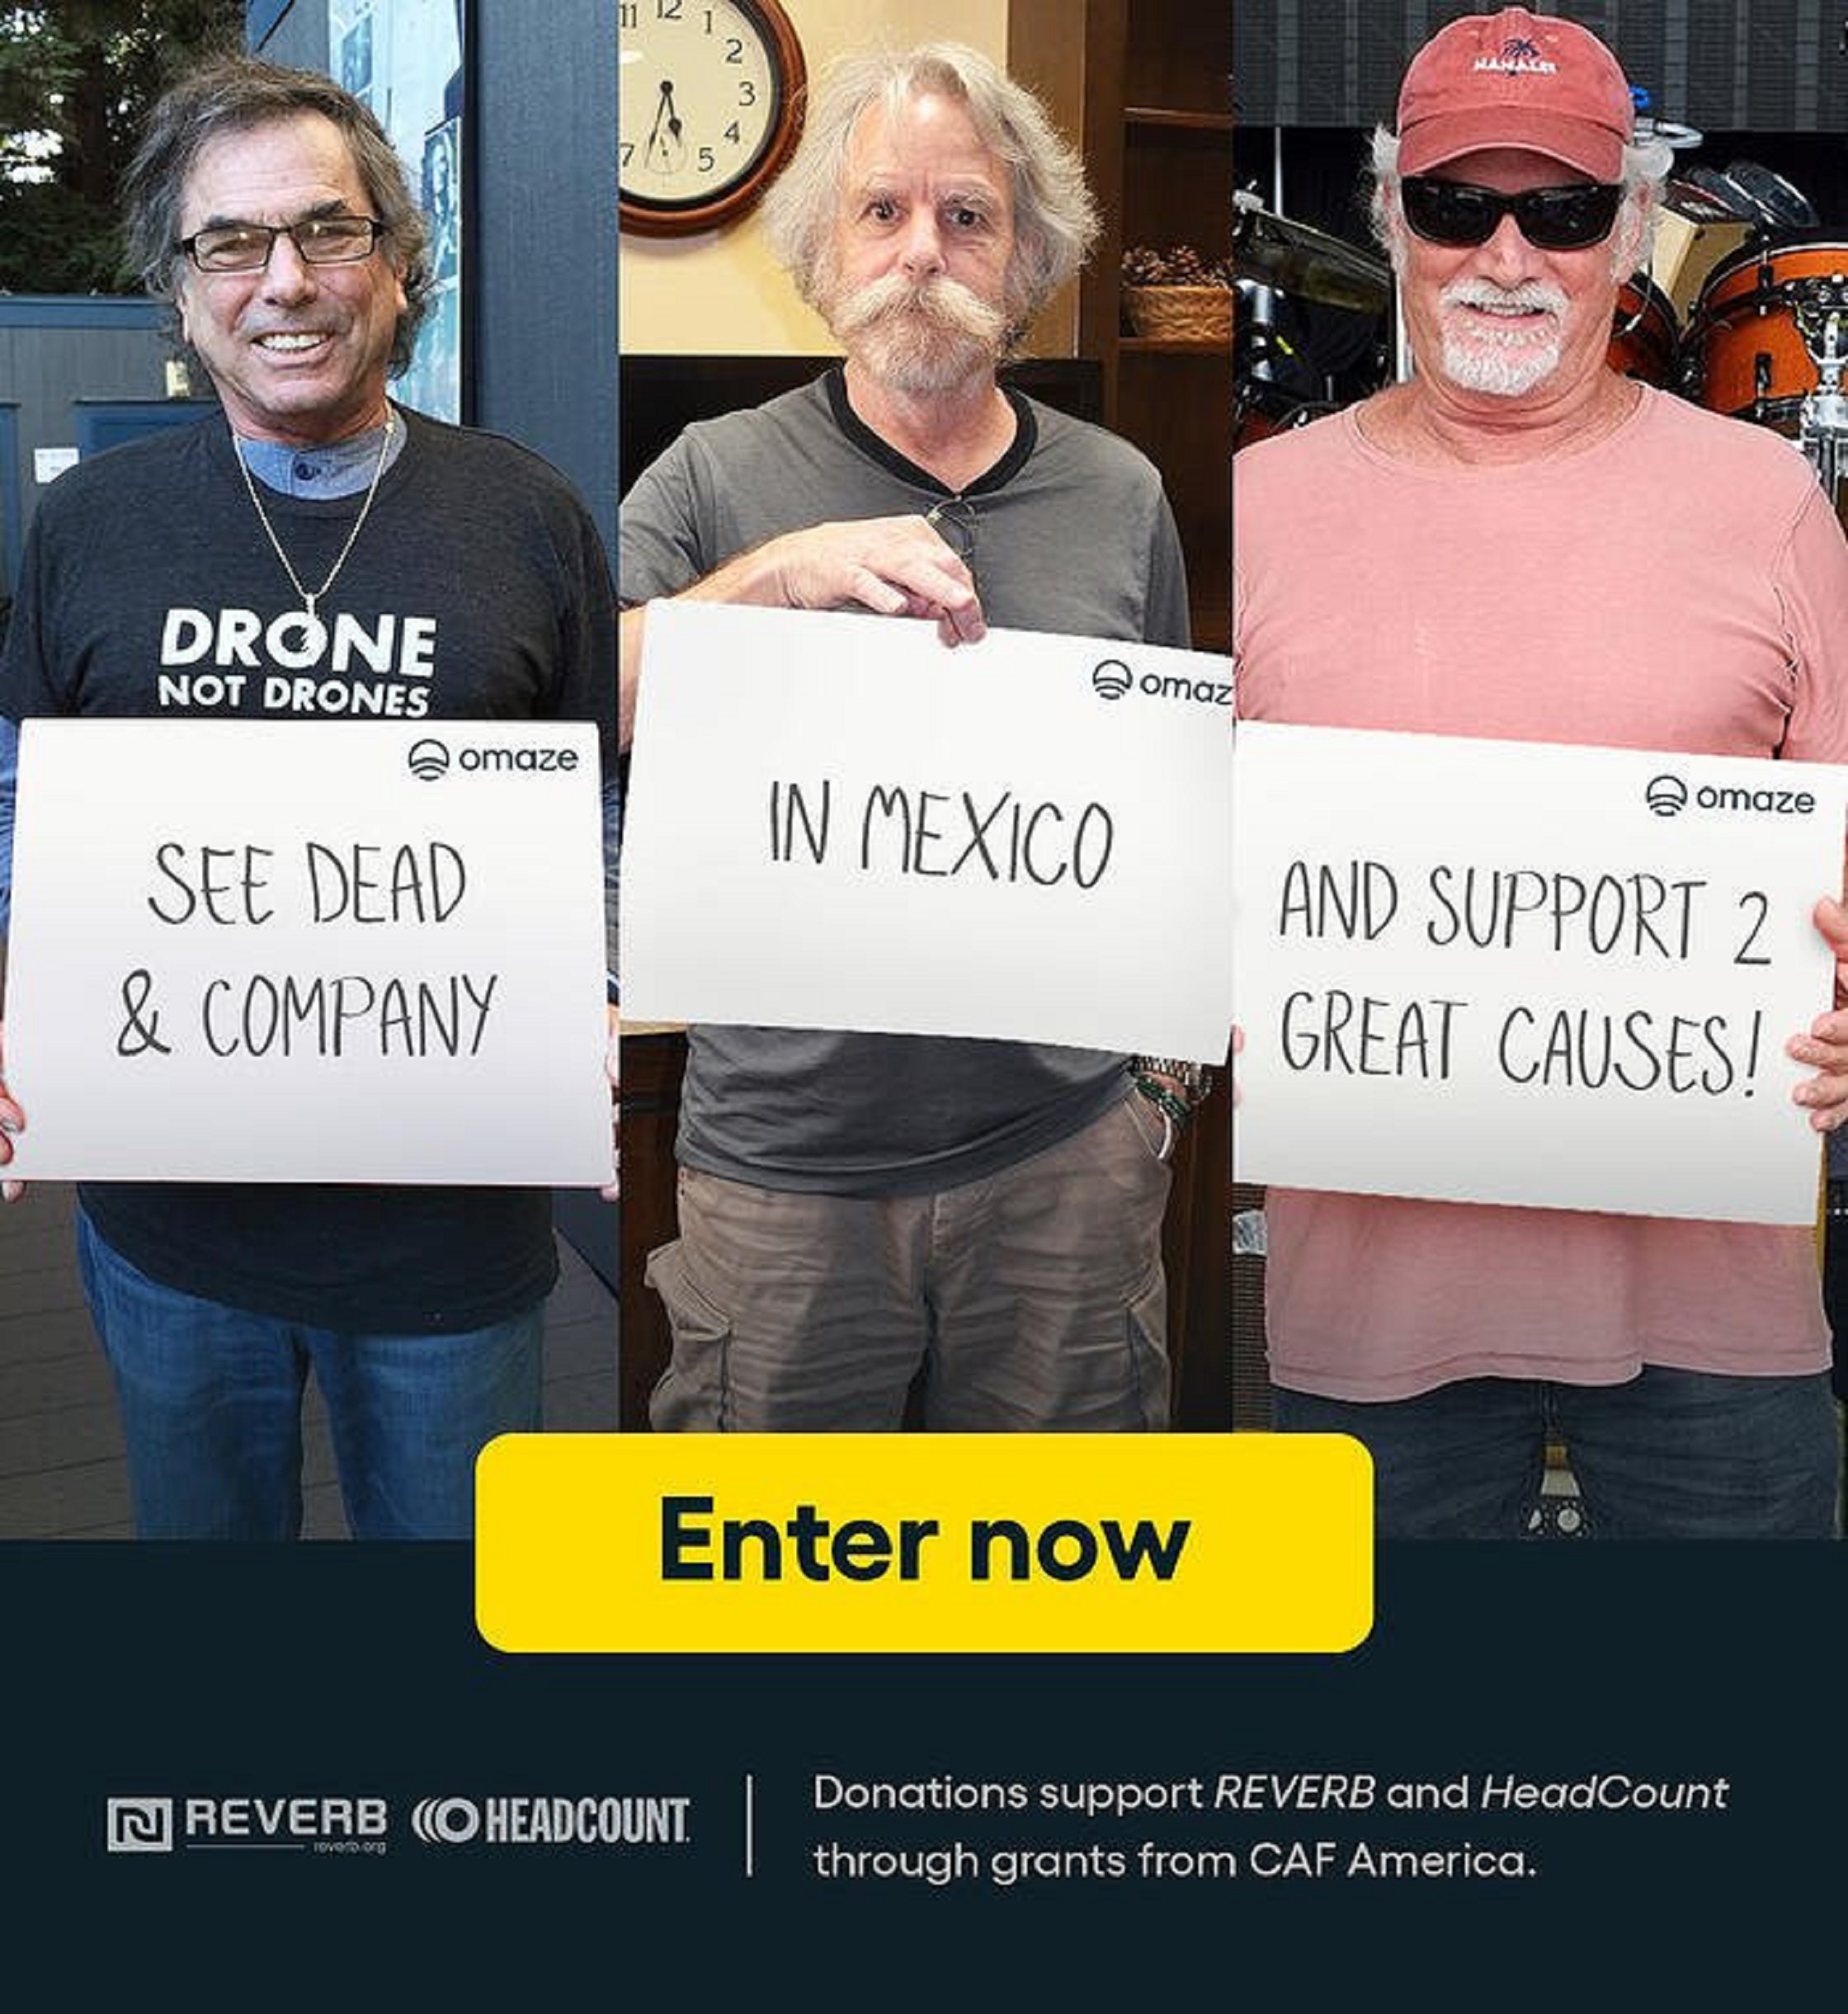 See Dead & Company in Mexico and Support 2 Great Causes!